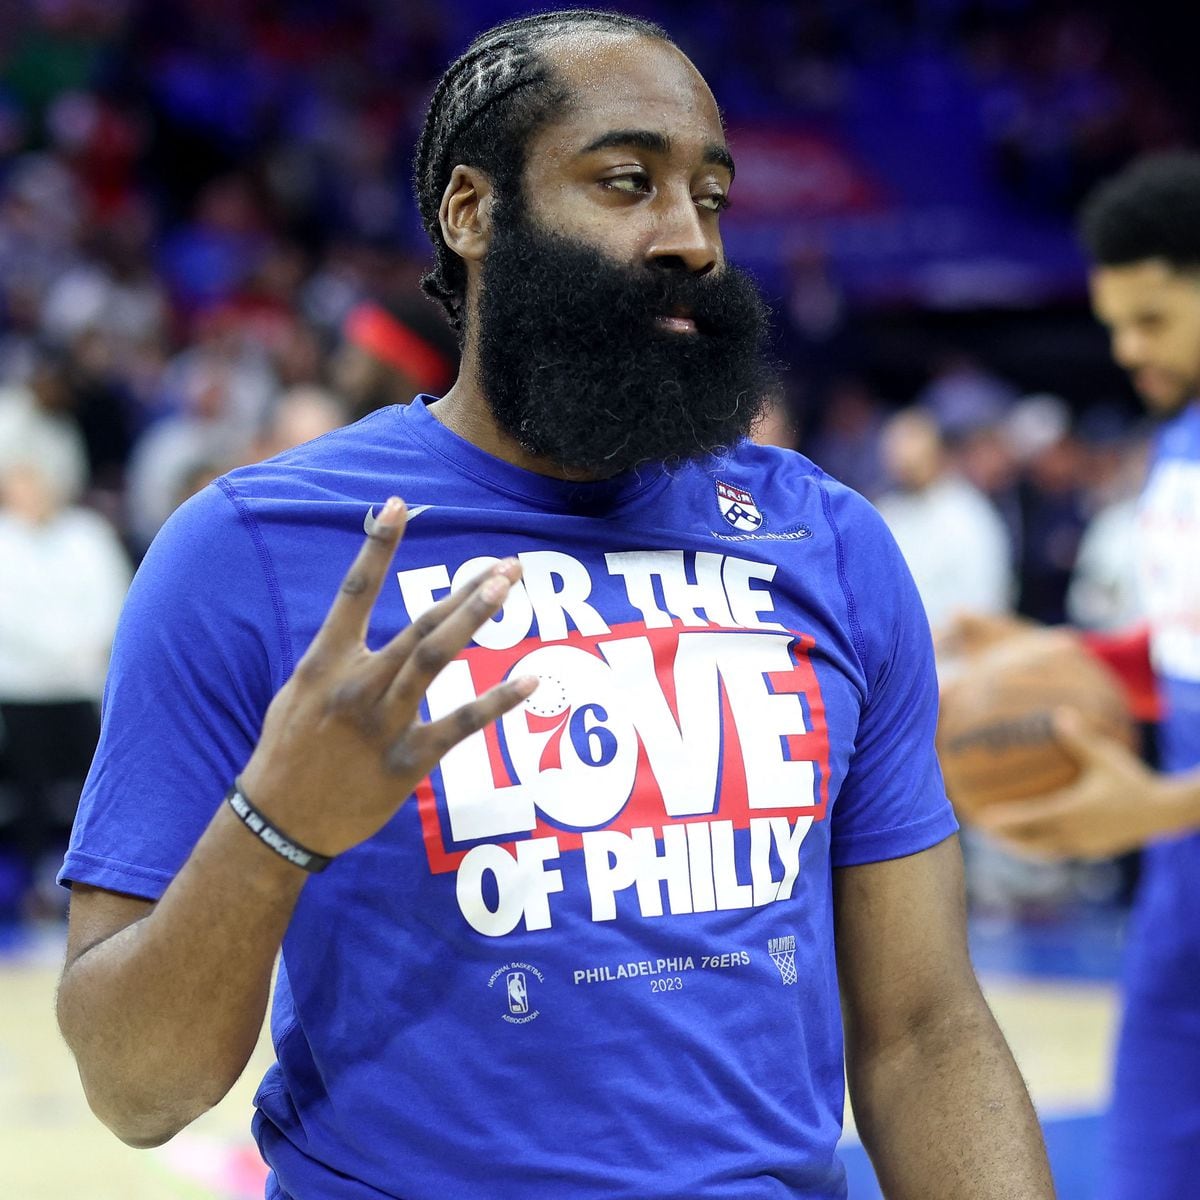 The Celtics ripped James Harden's jersey in Game 1